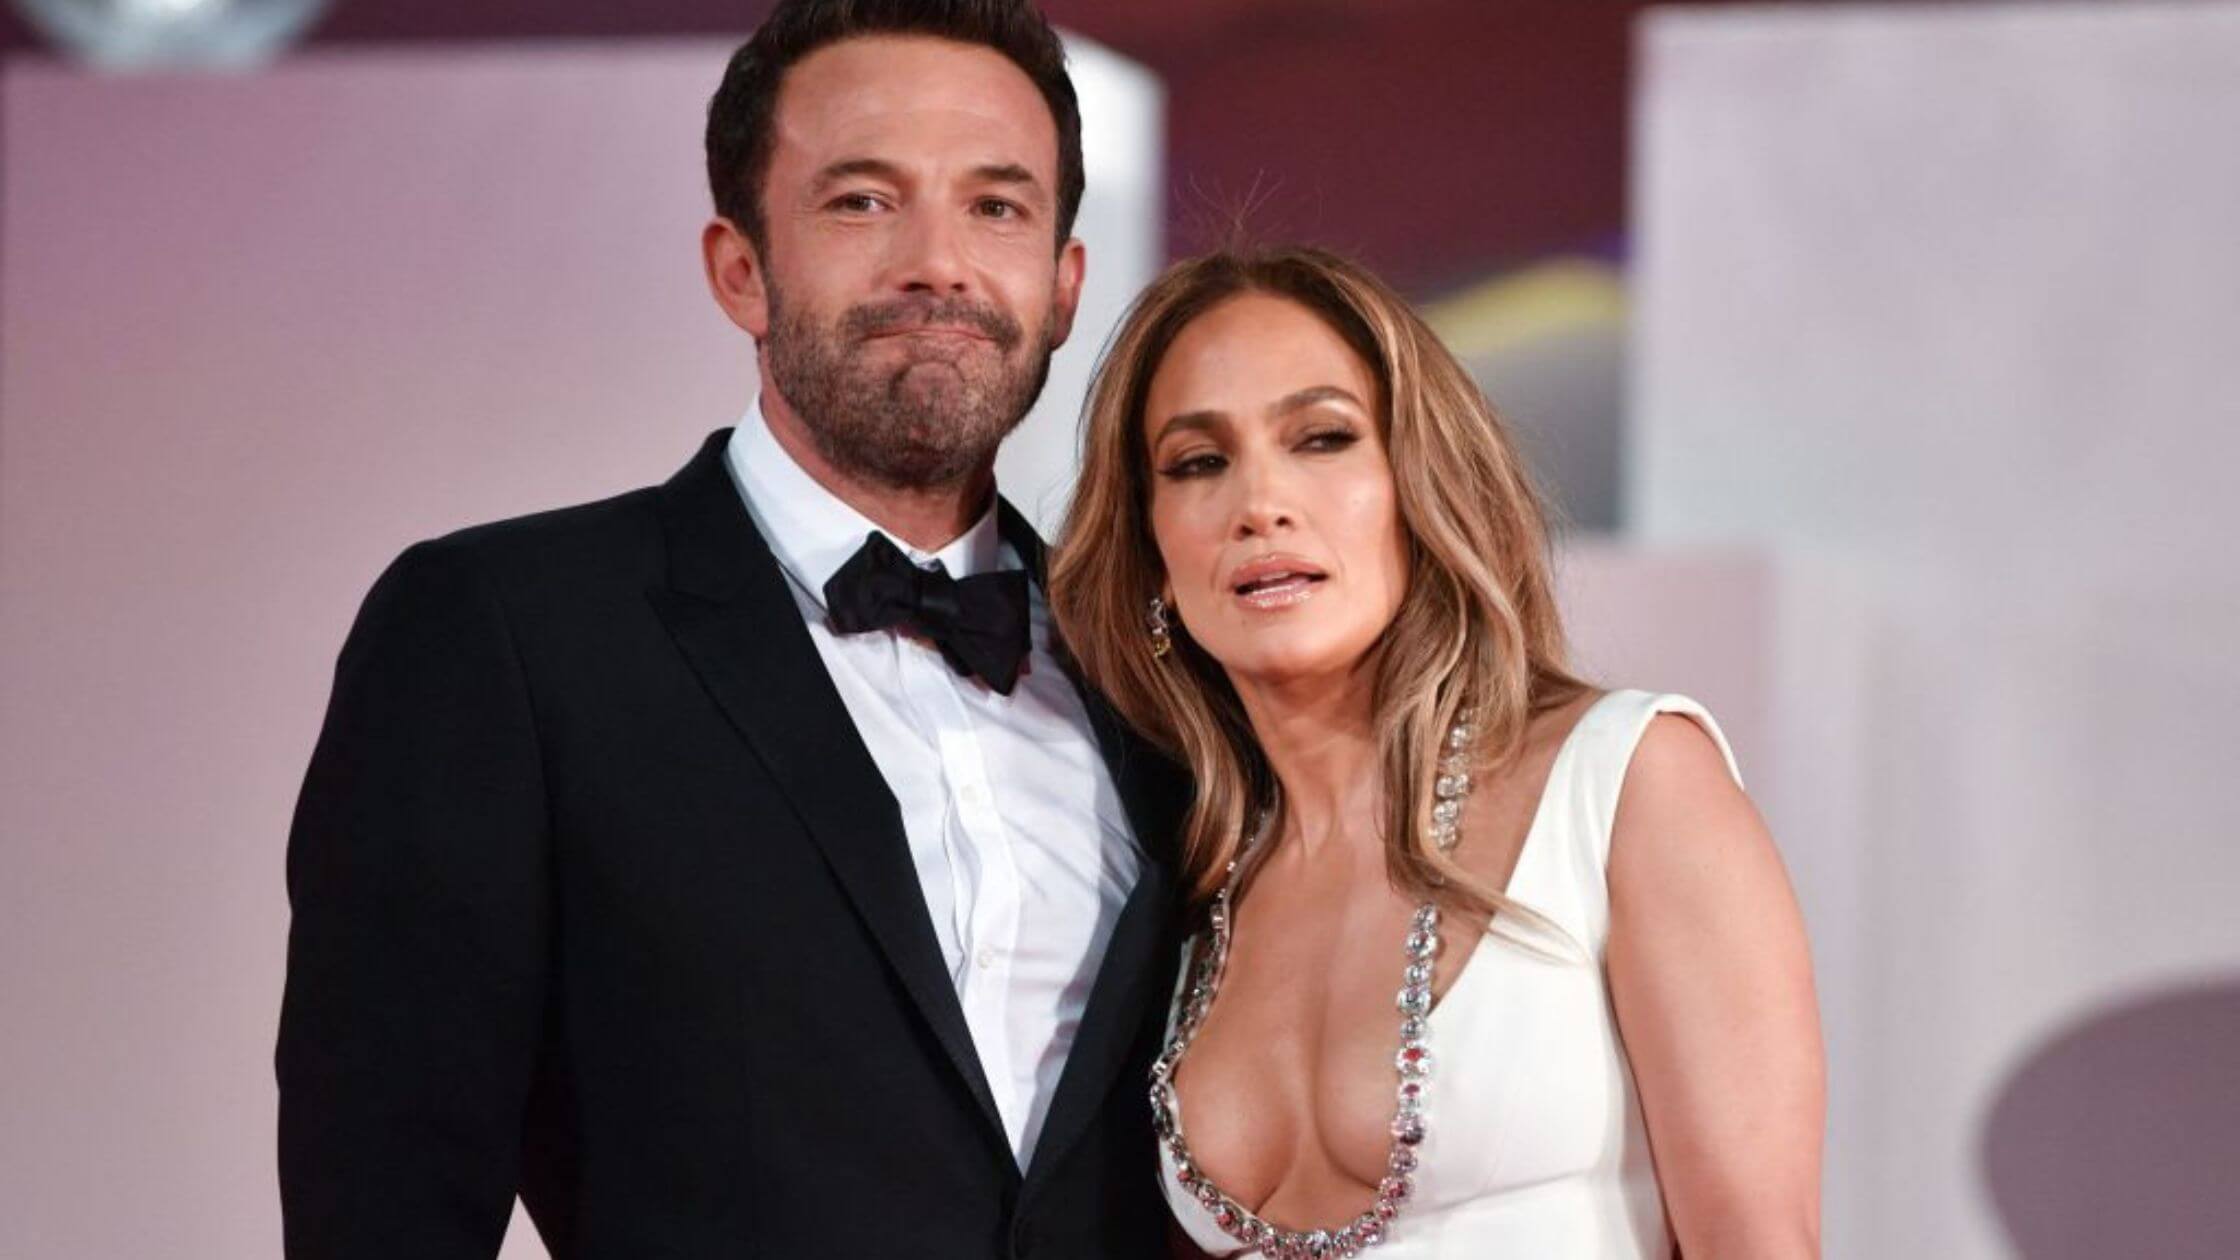 Chelsea Handler Is Happy That Jennifer Lopez and Ben Affleck Finding Love Again After Her Own Breakup